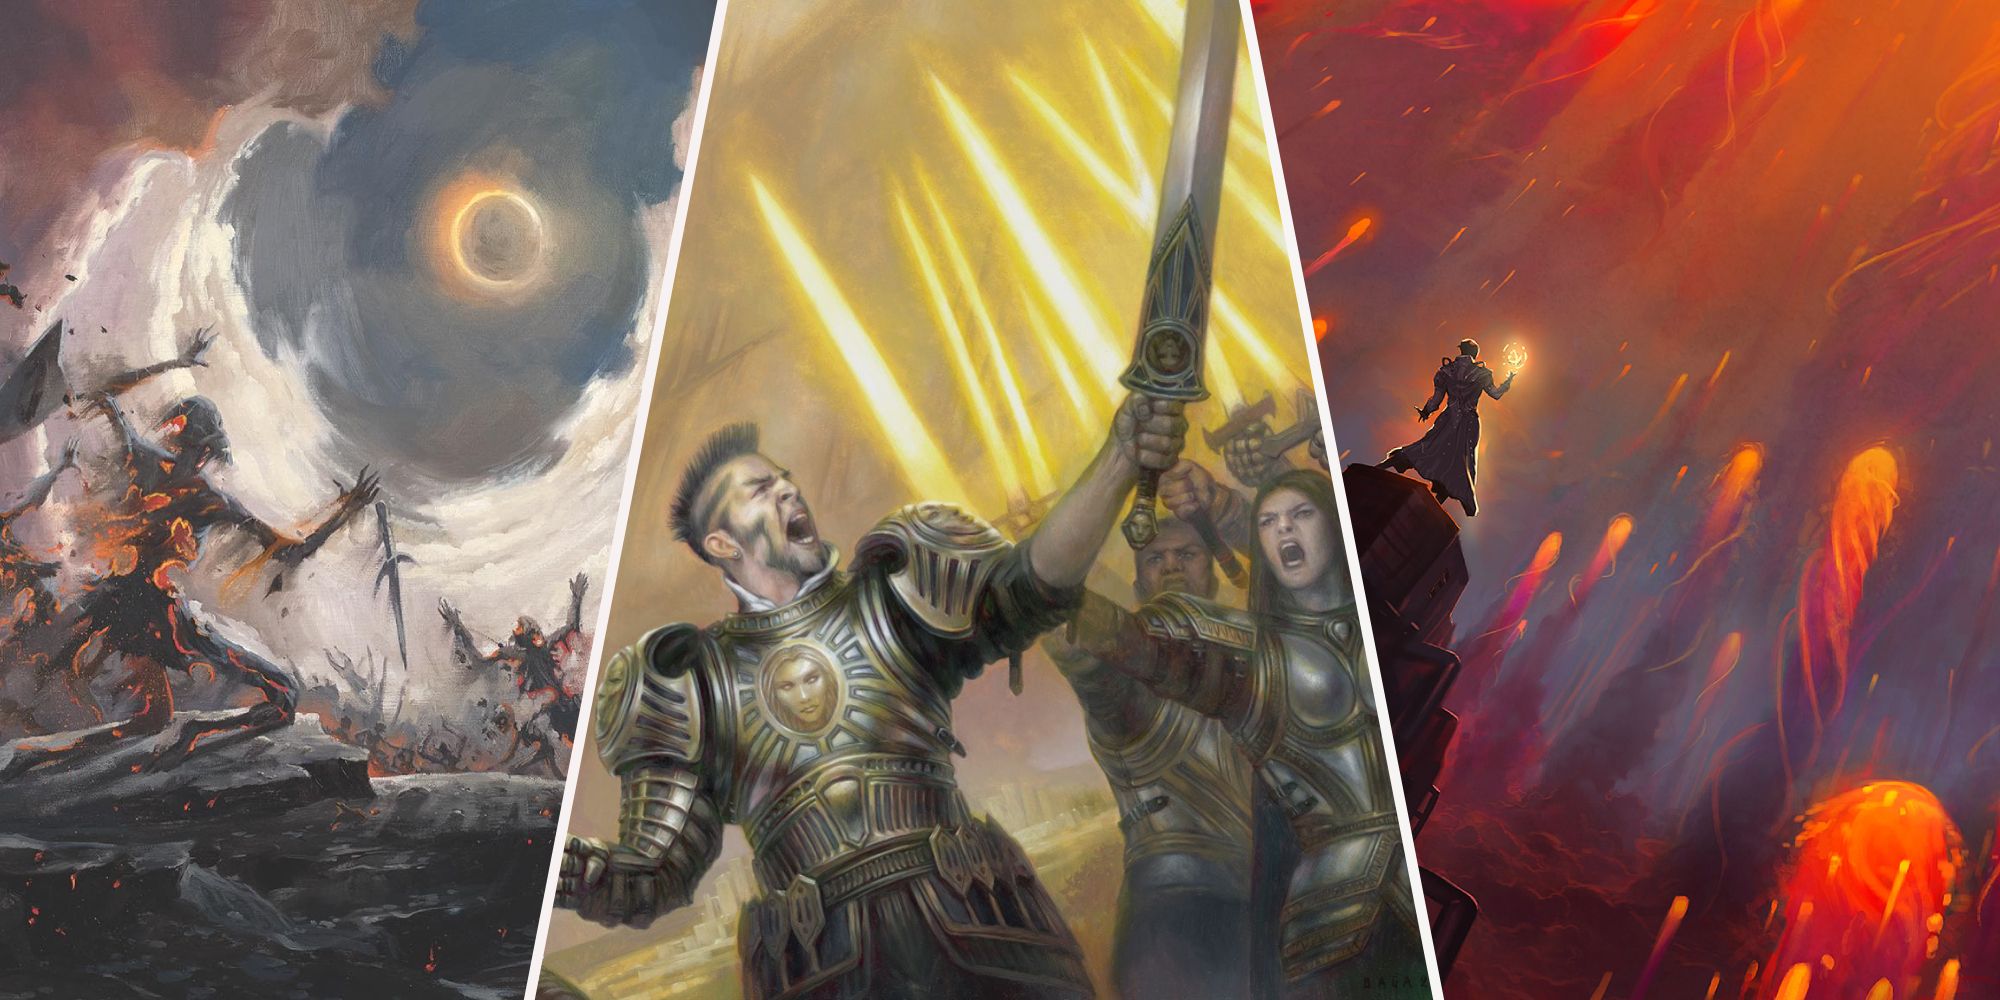 From left to right: Damn by Lucas Graciano, Stirring Address by Volkan Baǵa, and Mizzium's Mortars by Noah Bradley